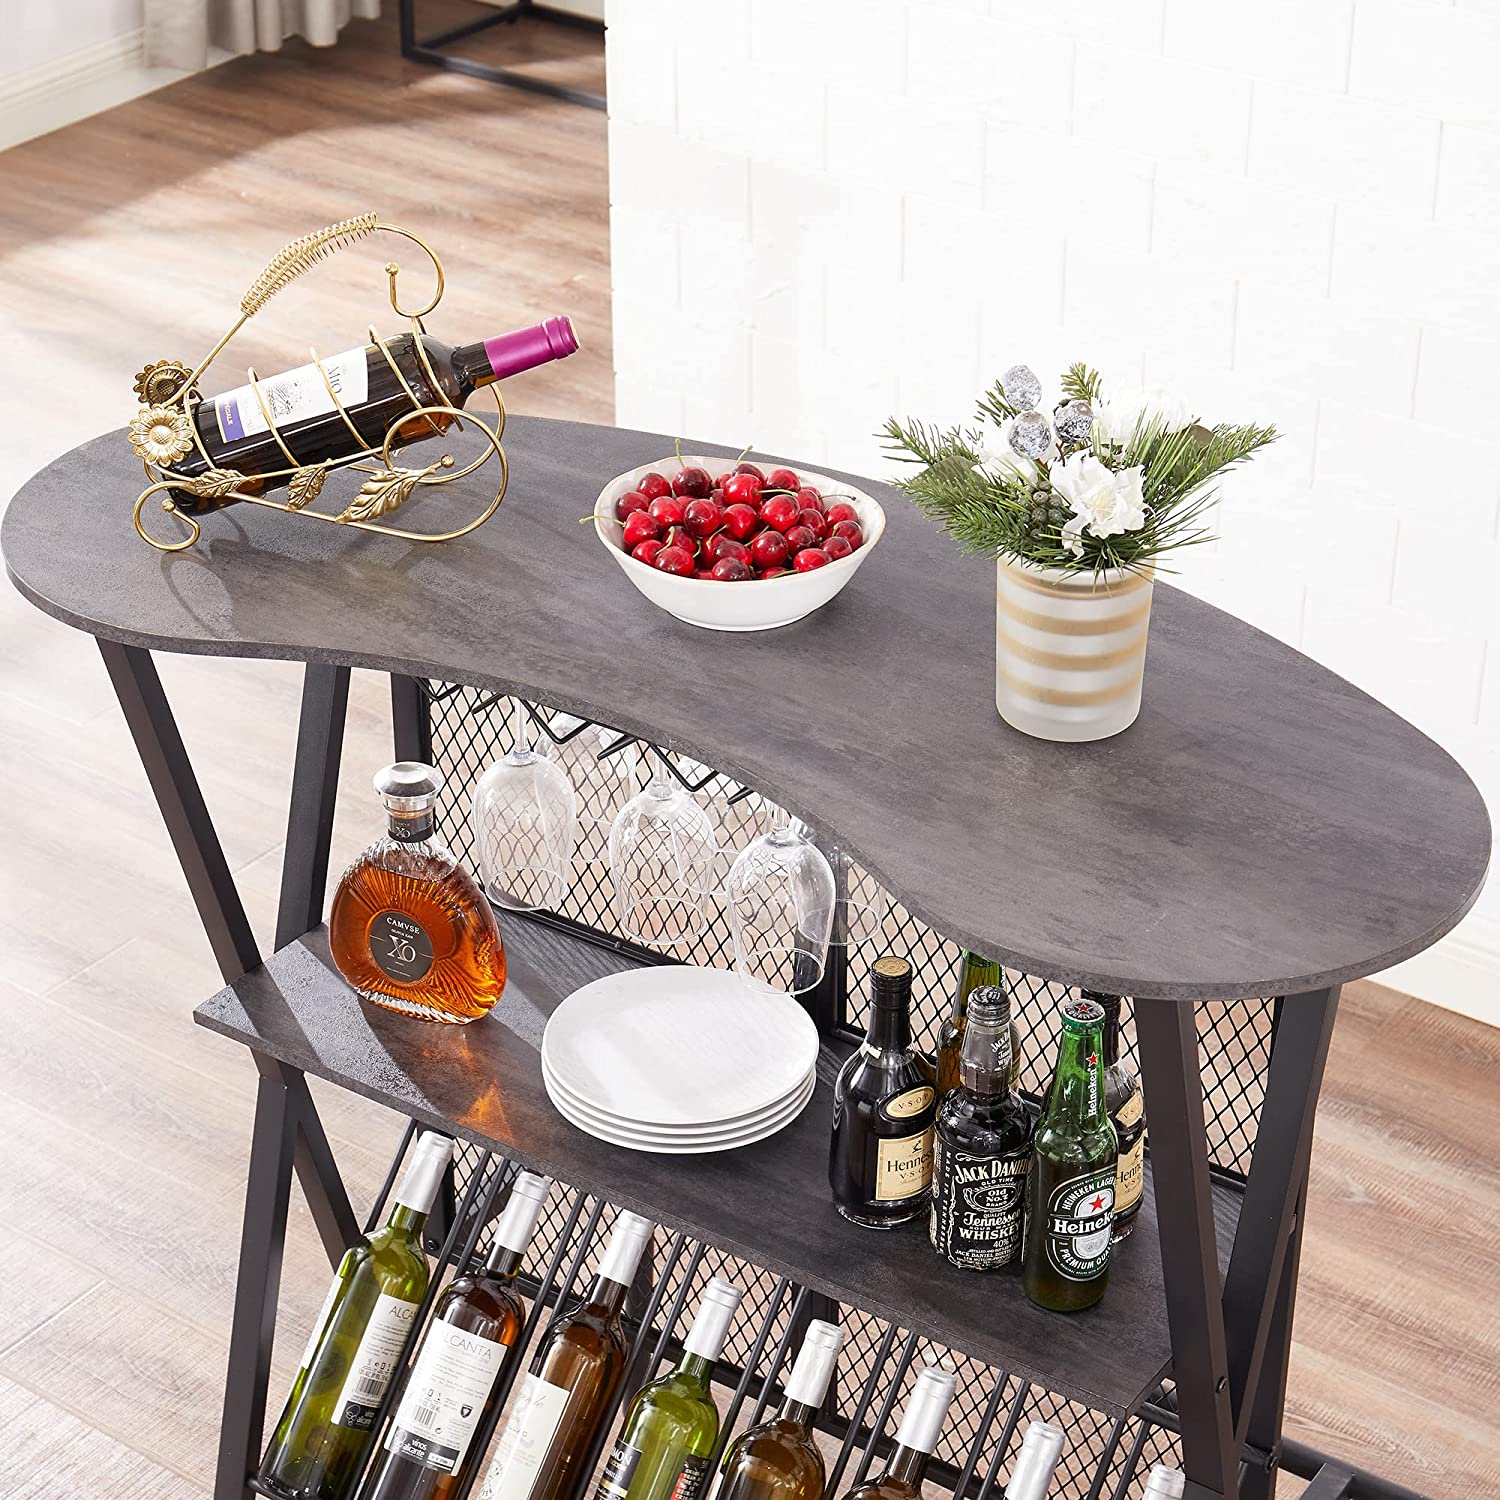 VECELO 3 Tier Oval Table Versatile Use Bar Cabinet with Open Storage Display Shelf and Footrail